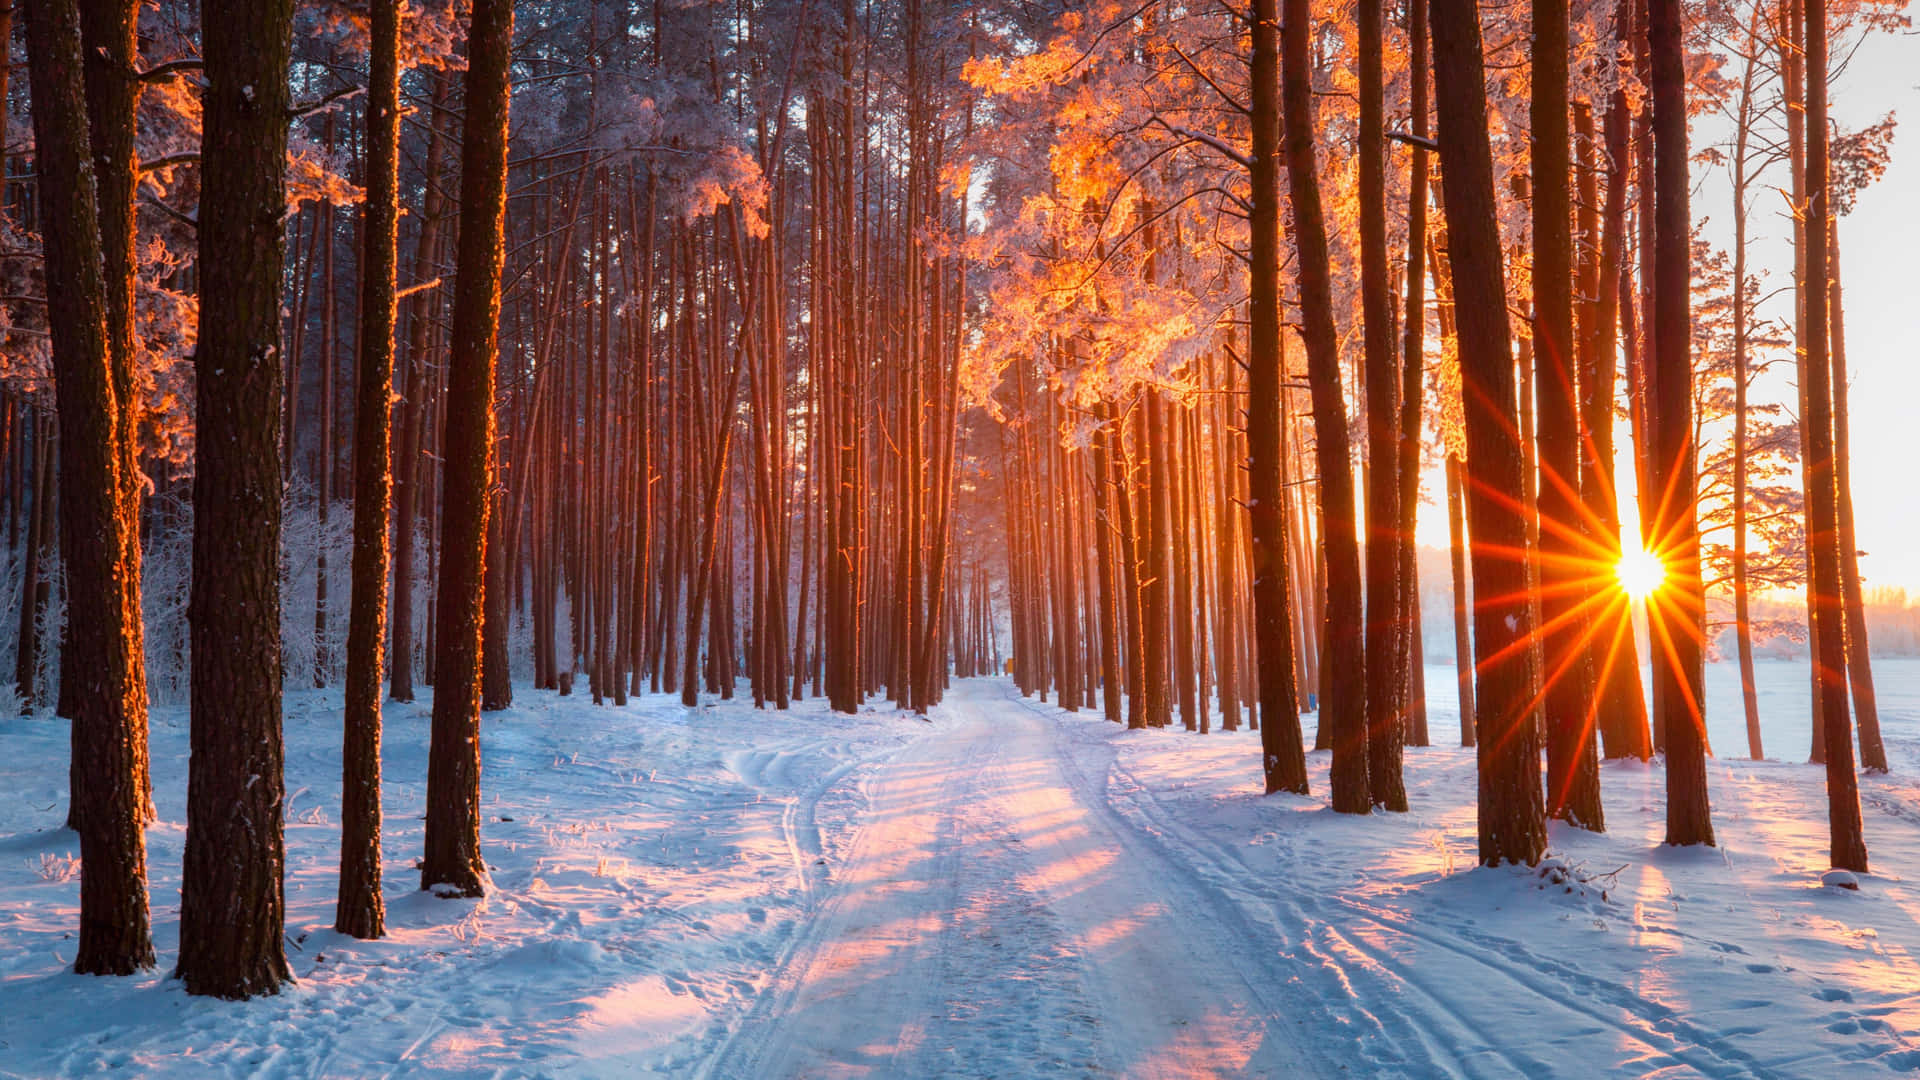 A Snow Covered Path In A Forest With The Sun Shining Through The Trees Wallpaper